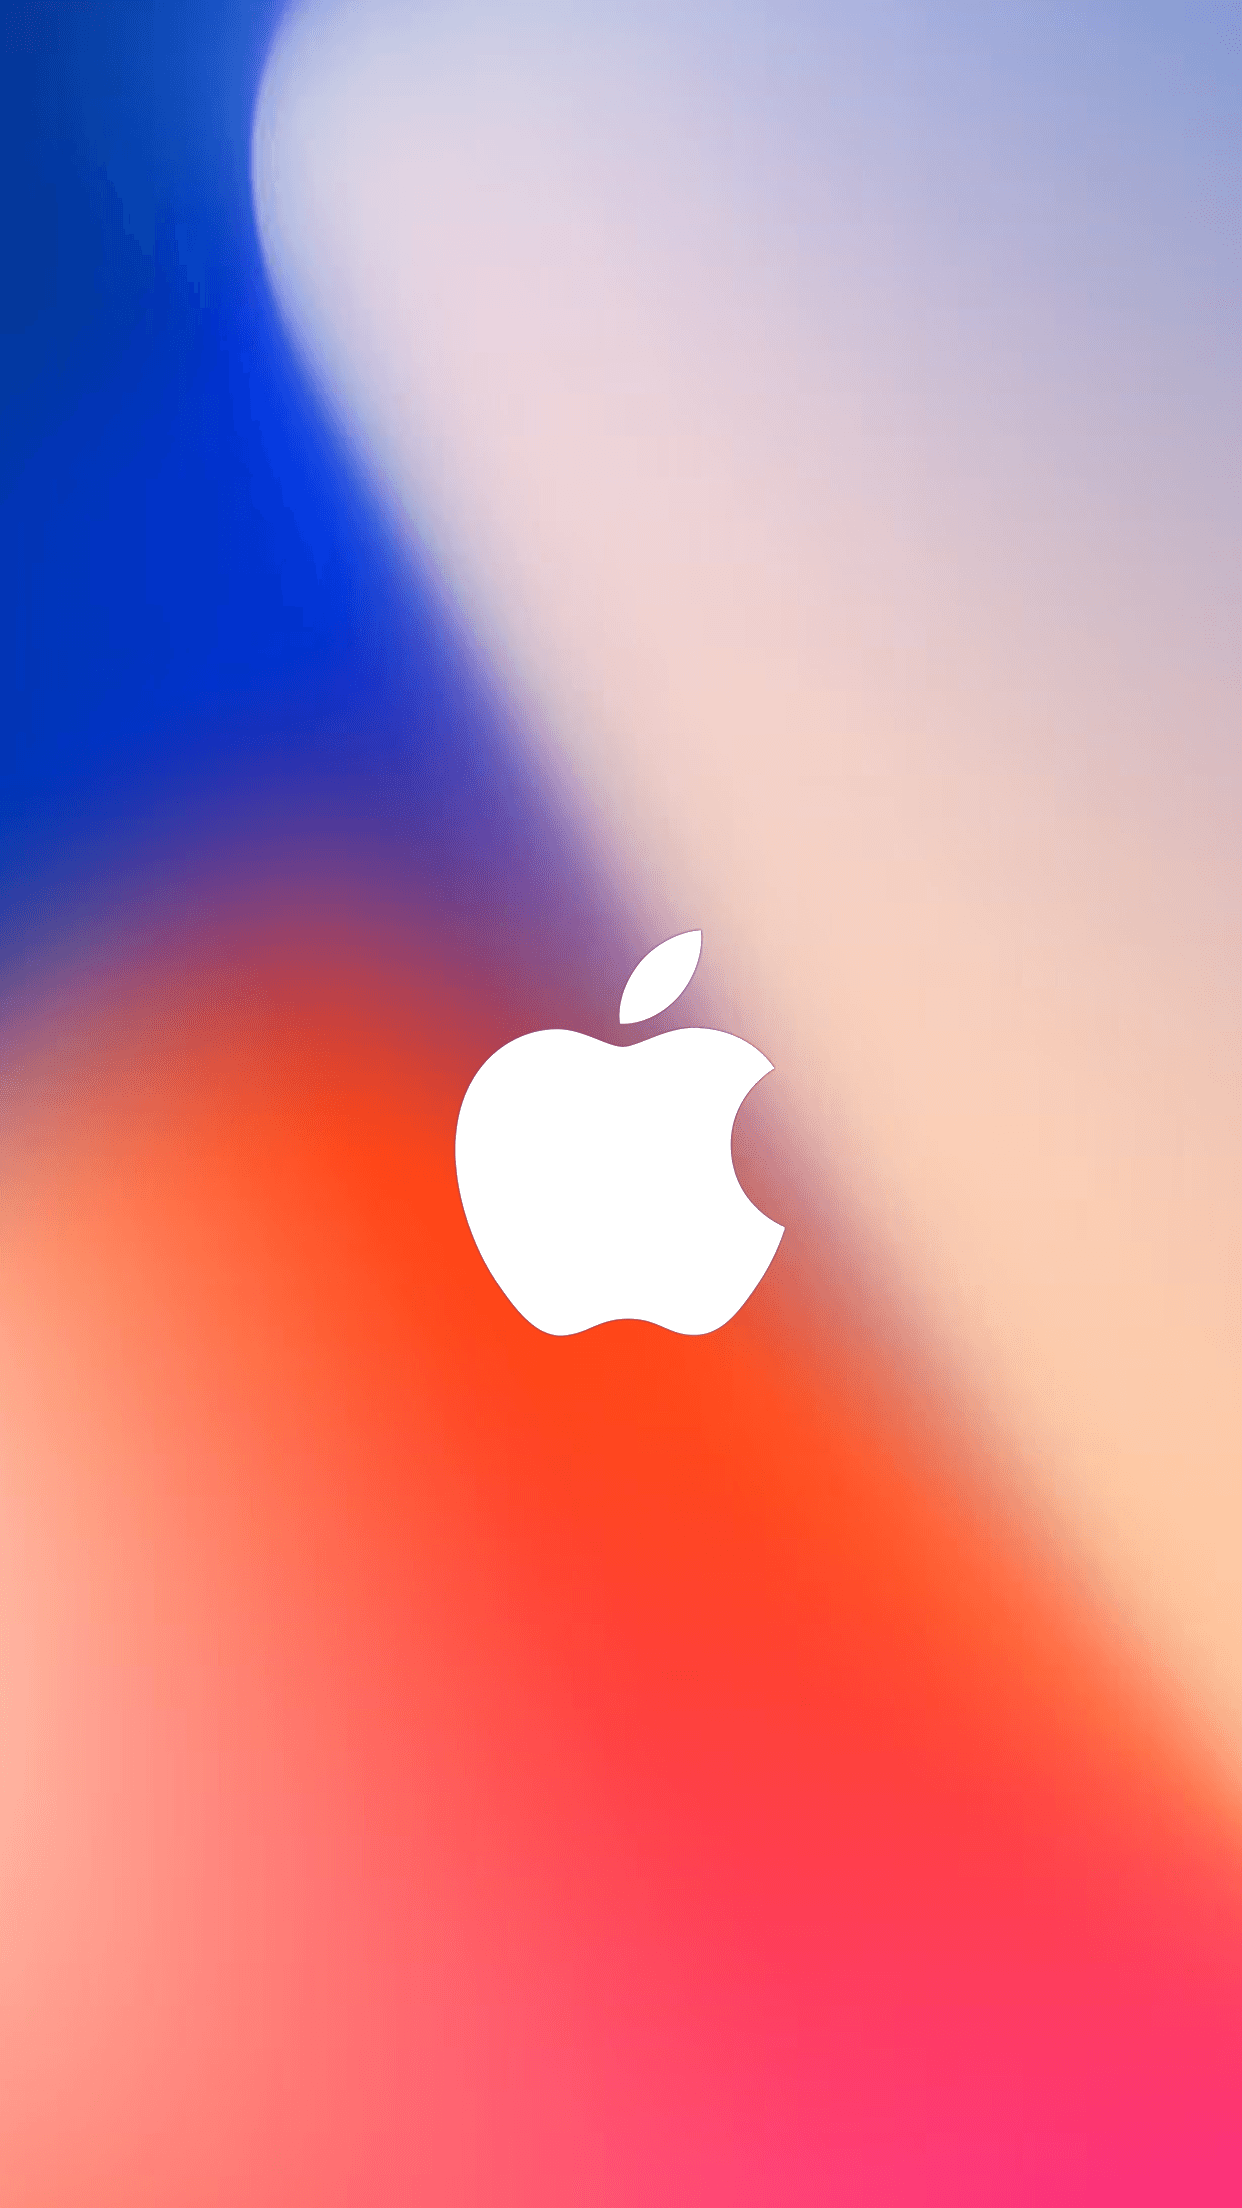 IPhone event wallpapers